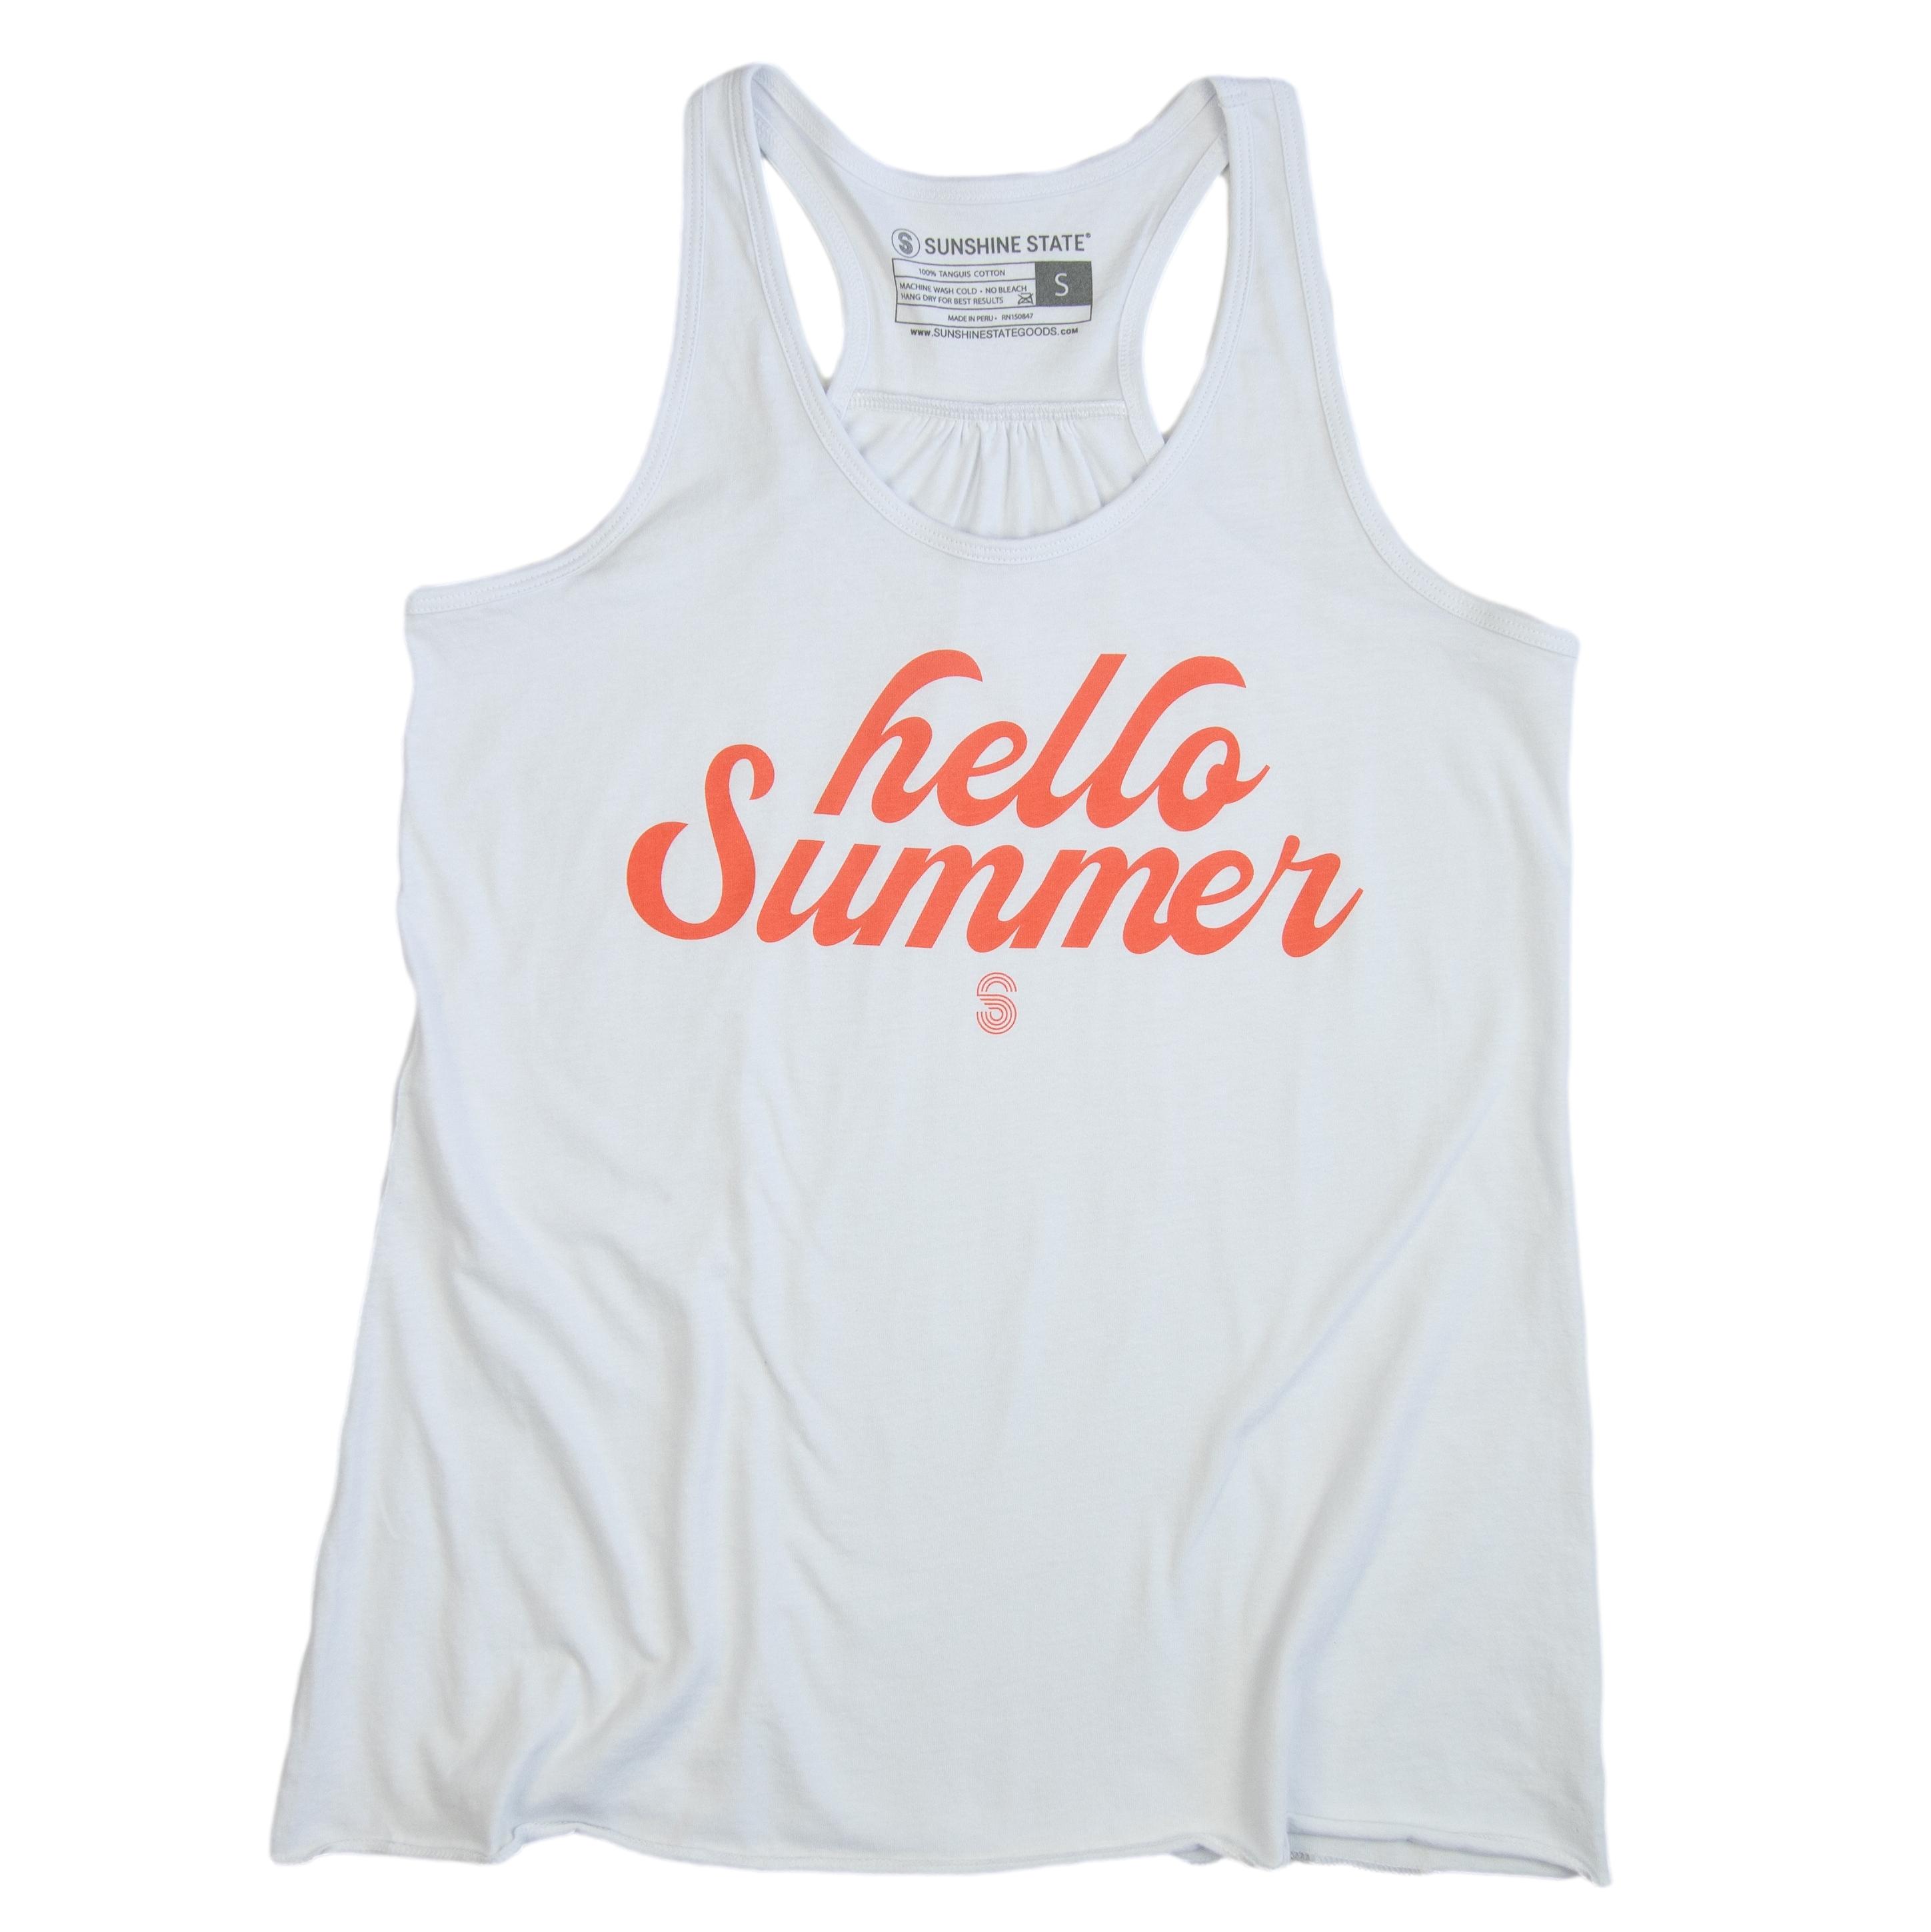 Ooooweee, we cannot wait for summer 🌞 - Gently used Tank / M